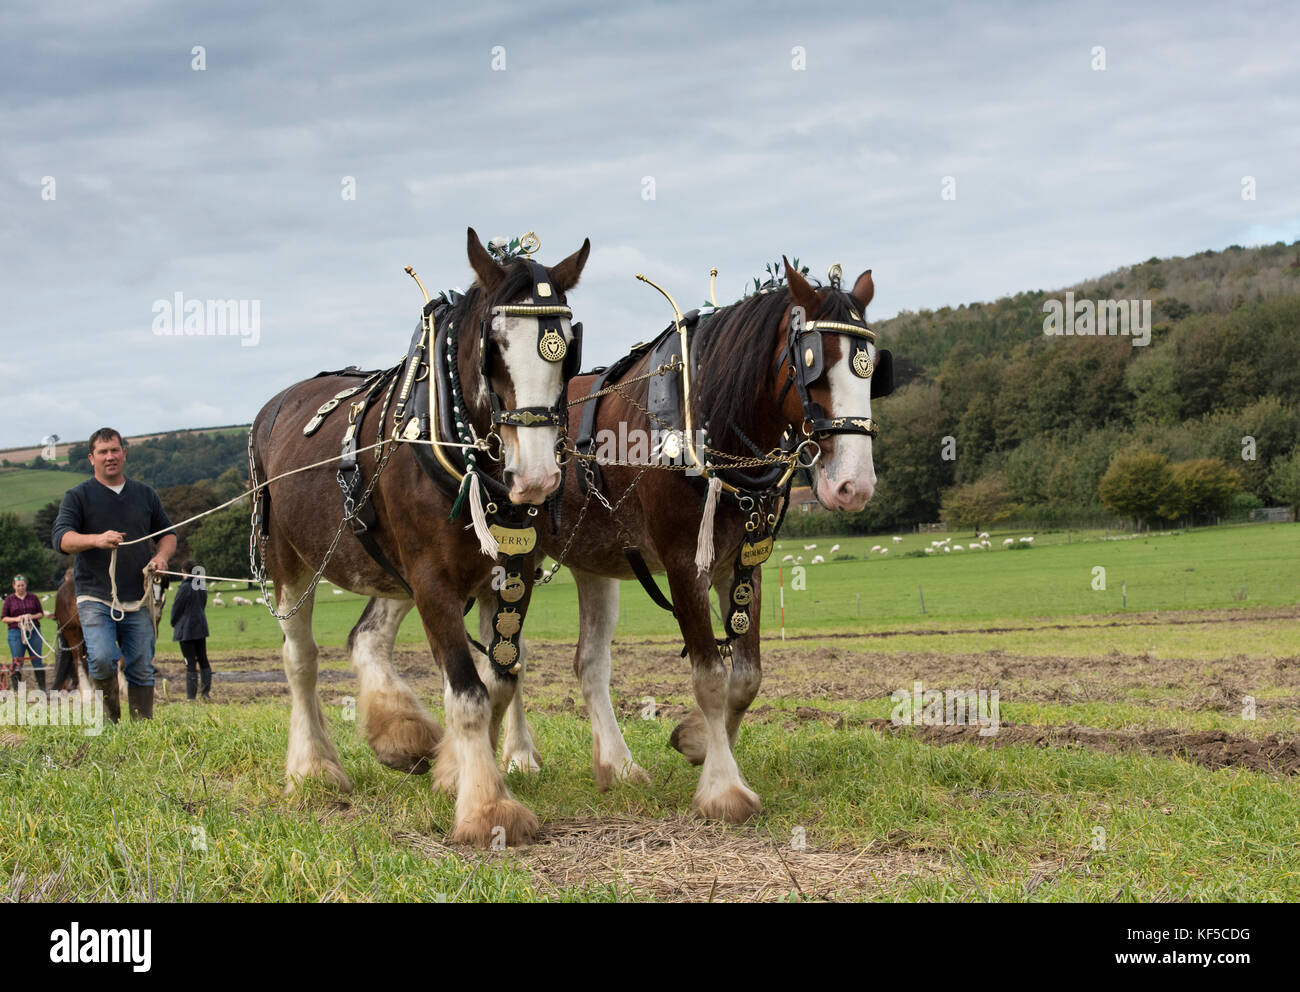 Shire cavalli a Weald and Downland Open Air Museum, Campagna autunno mostra, Singleton, Sussex, Inghilterra Foto Stock